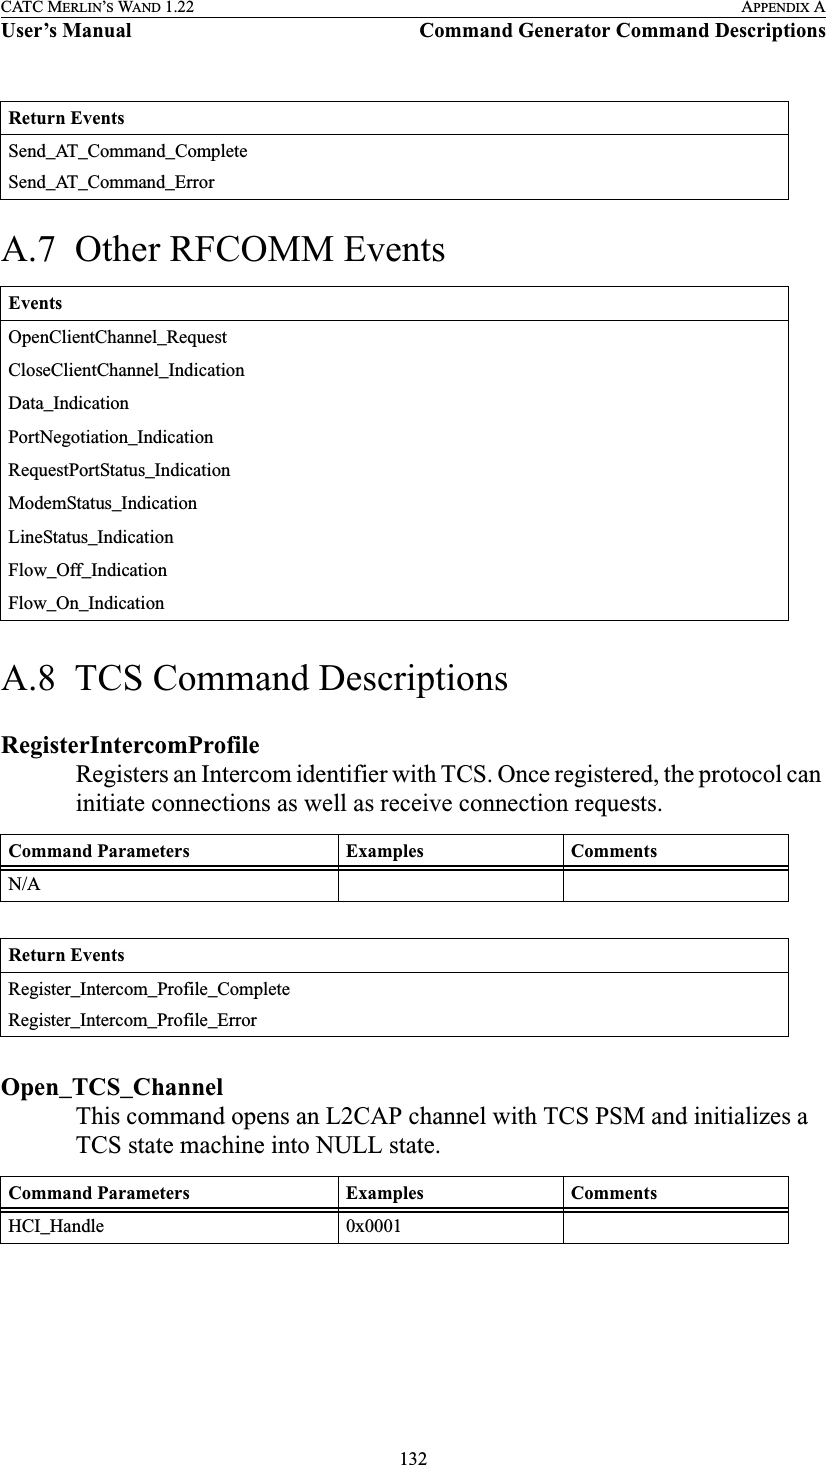 132CATC MERLIN’S WAND 1.22 APPENDIX AUser’s Manual Command Generator Command DescriptionsA.7  Other RFCOMM Events A.8  TCS Command DescriptionsRegisterIntercomProfileRegisters an Intercom identifier with TCS. Once registered, the protocol can initiate connections as well as receive connection requests.Open_TCS_ChannelThis command opens an L2CAP channel with TCS PSM and initializes a TCS state machine into NULL state. Return EventsSend_AT_Command_CompleteSend_AT_Command_ErrorEventsOpenClientChannel_RequestCloseClientChannel_IndicationData_IndicationPortNegotiation_IndicationRequestPortStatus_IndicationModemStatus_IndicationLineStatus_IndicationFlow_Off_IndicationFlow_On_IndicationCommand Parameters Examples CommentsN/AReturn EventsRegister_Intercom_Profile_CompleteRegister_Intercom_Profile_ErrorCommand Parameters Examples CommentsHCI_Handle 0x0001